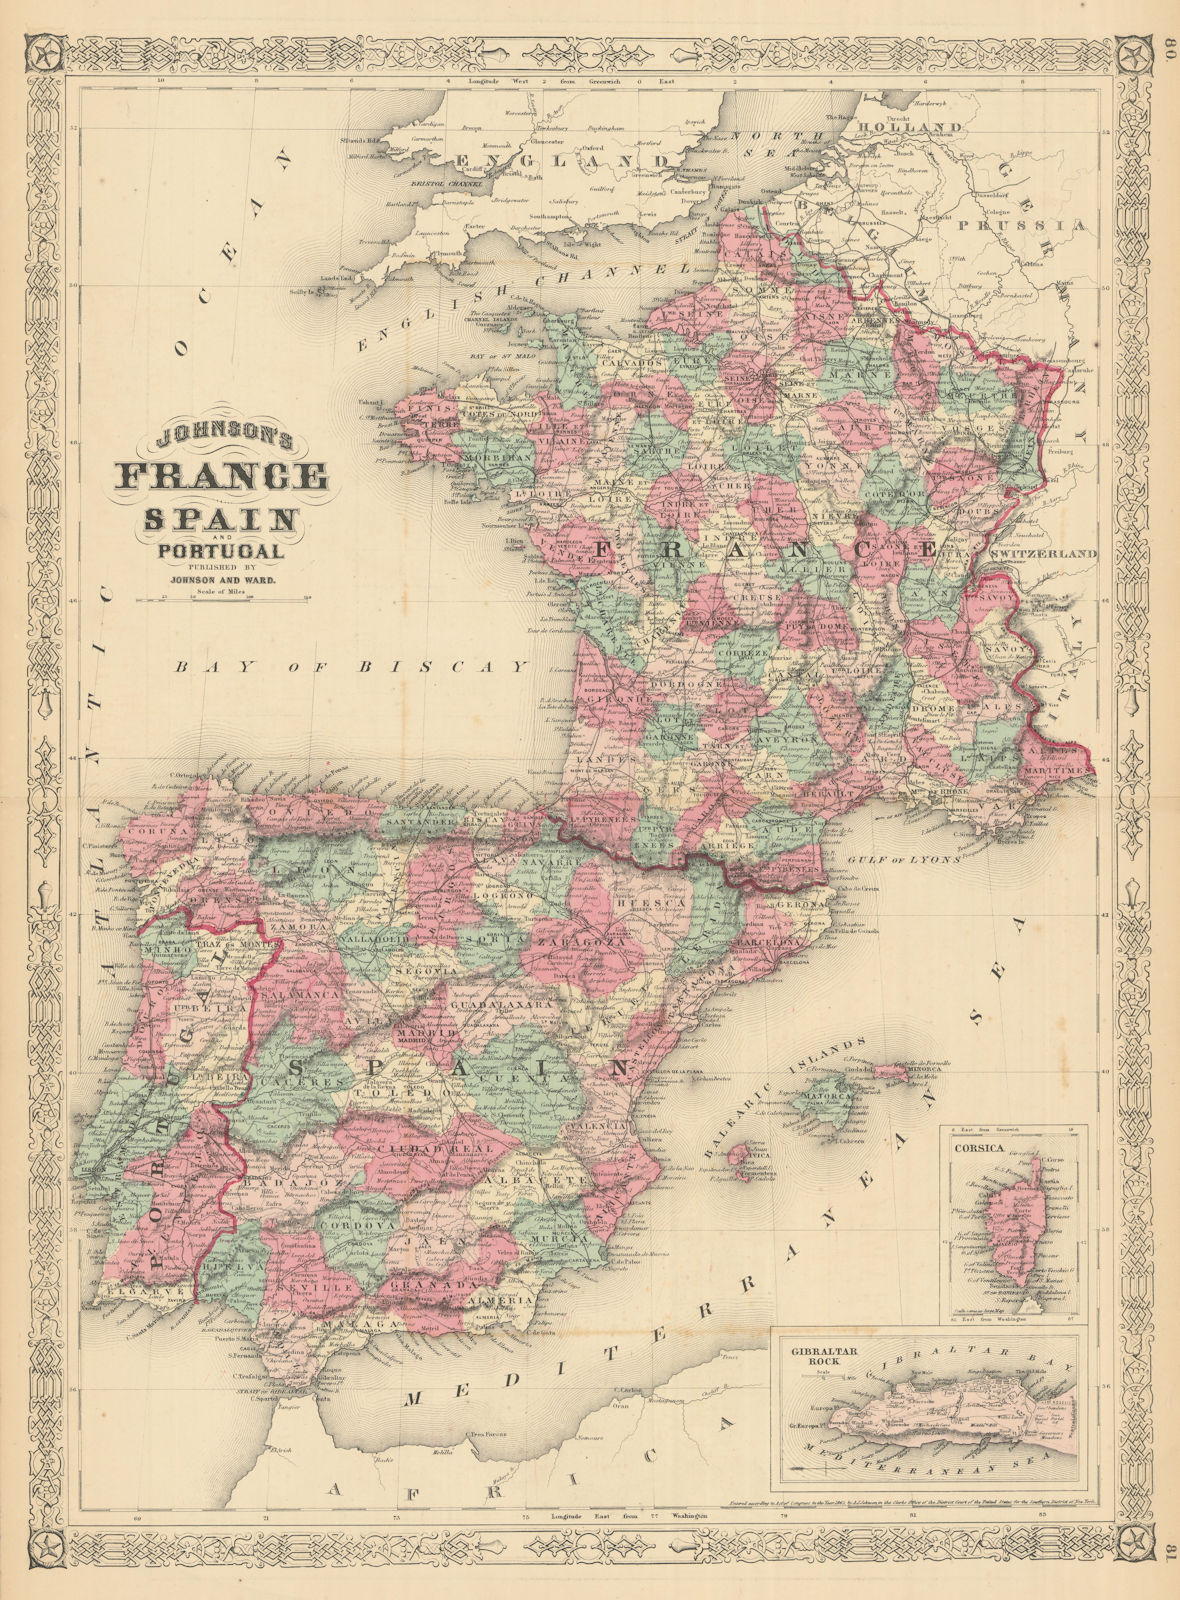 Associate Product Johnson's France, Spain and Portugal. Corsica Gibraltar Iberia 1866 old map